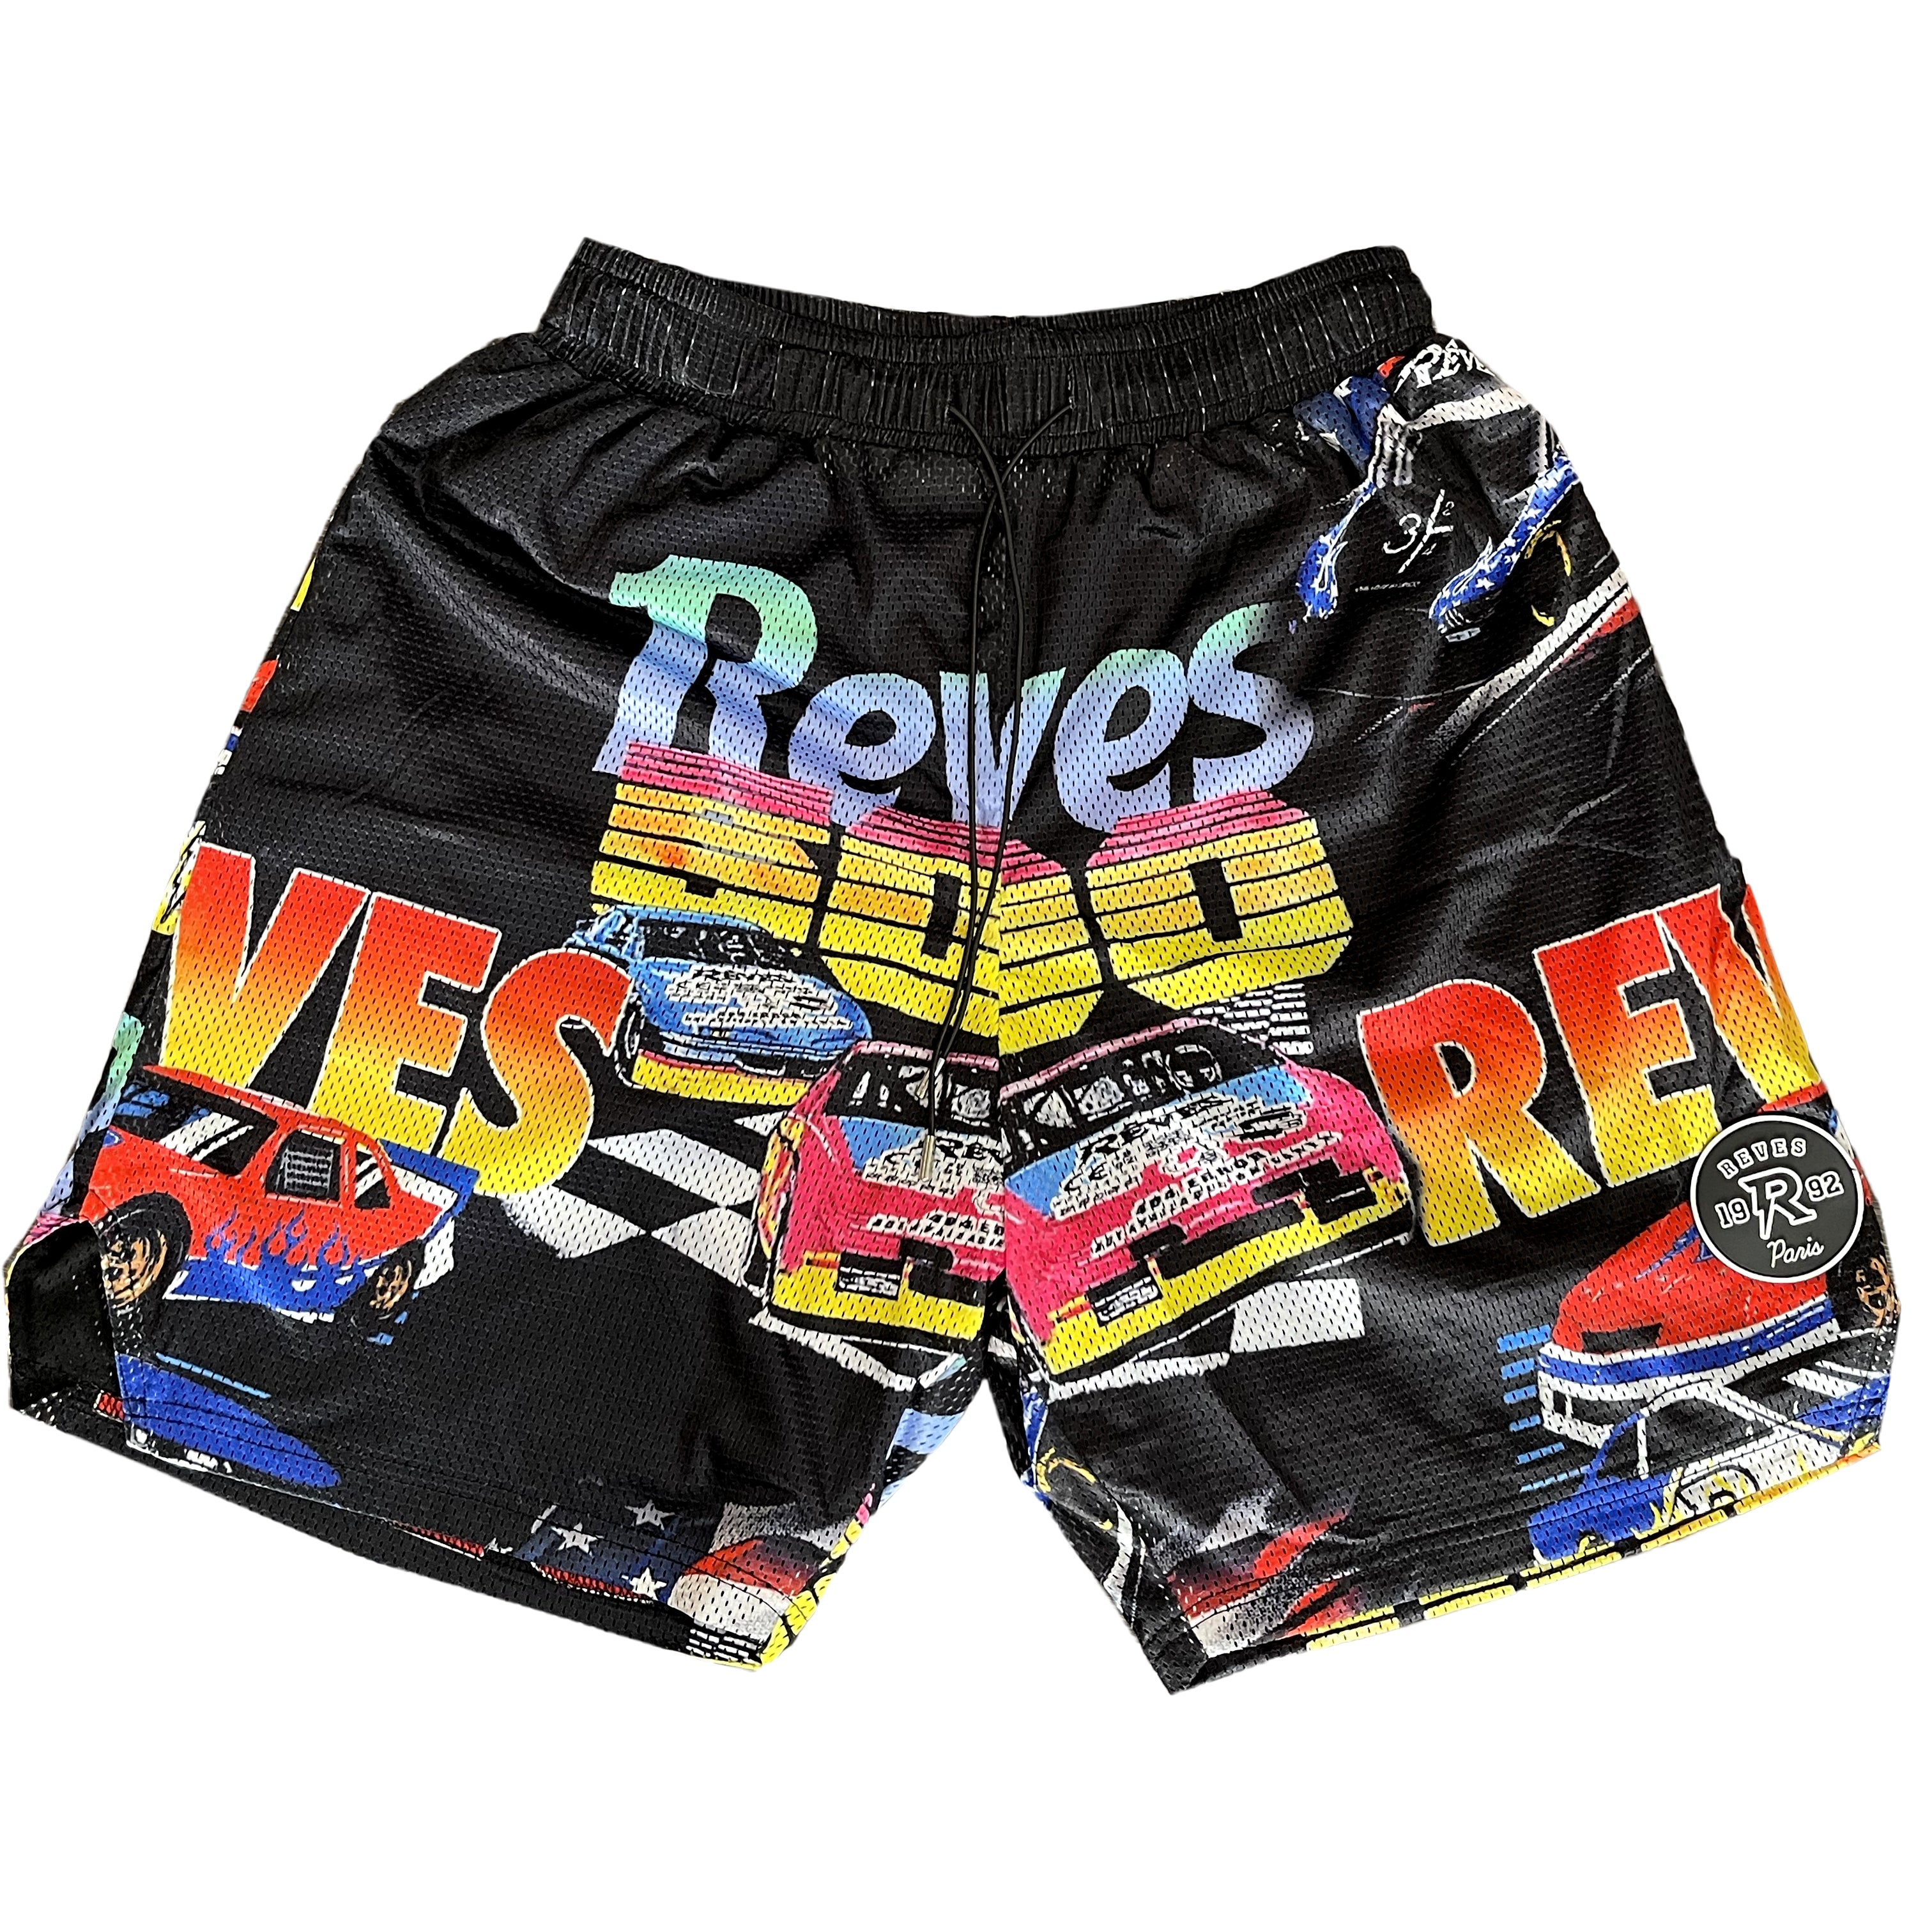 "Sponsored” (All-Over Print shorts)